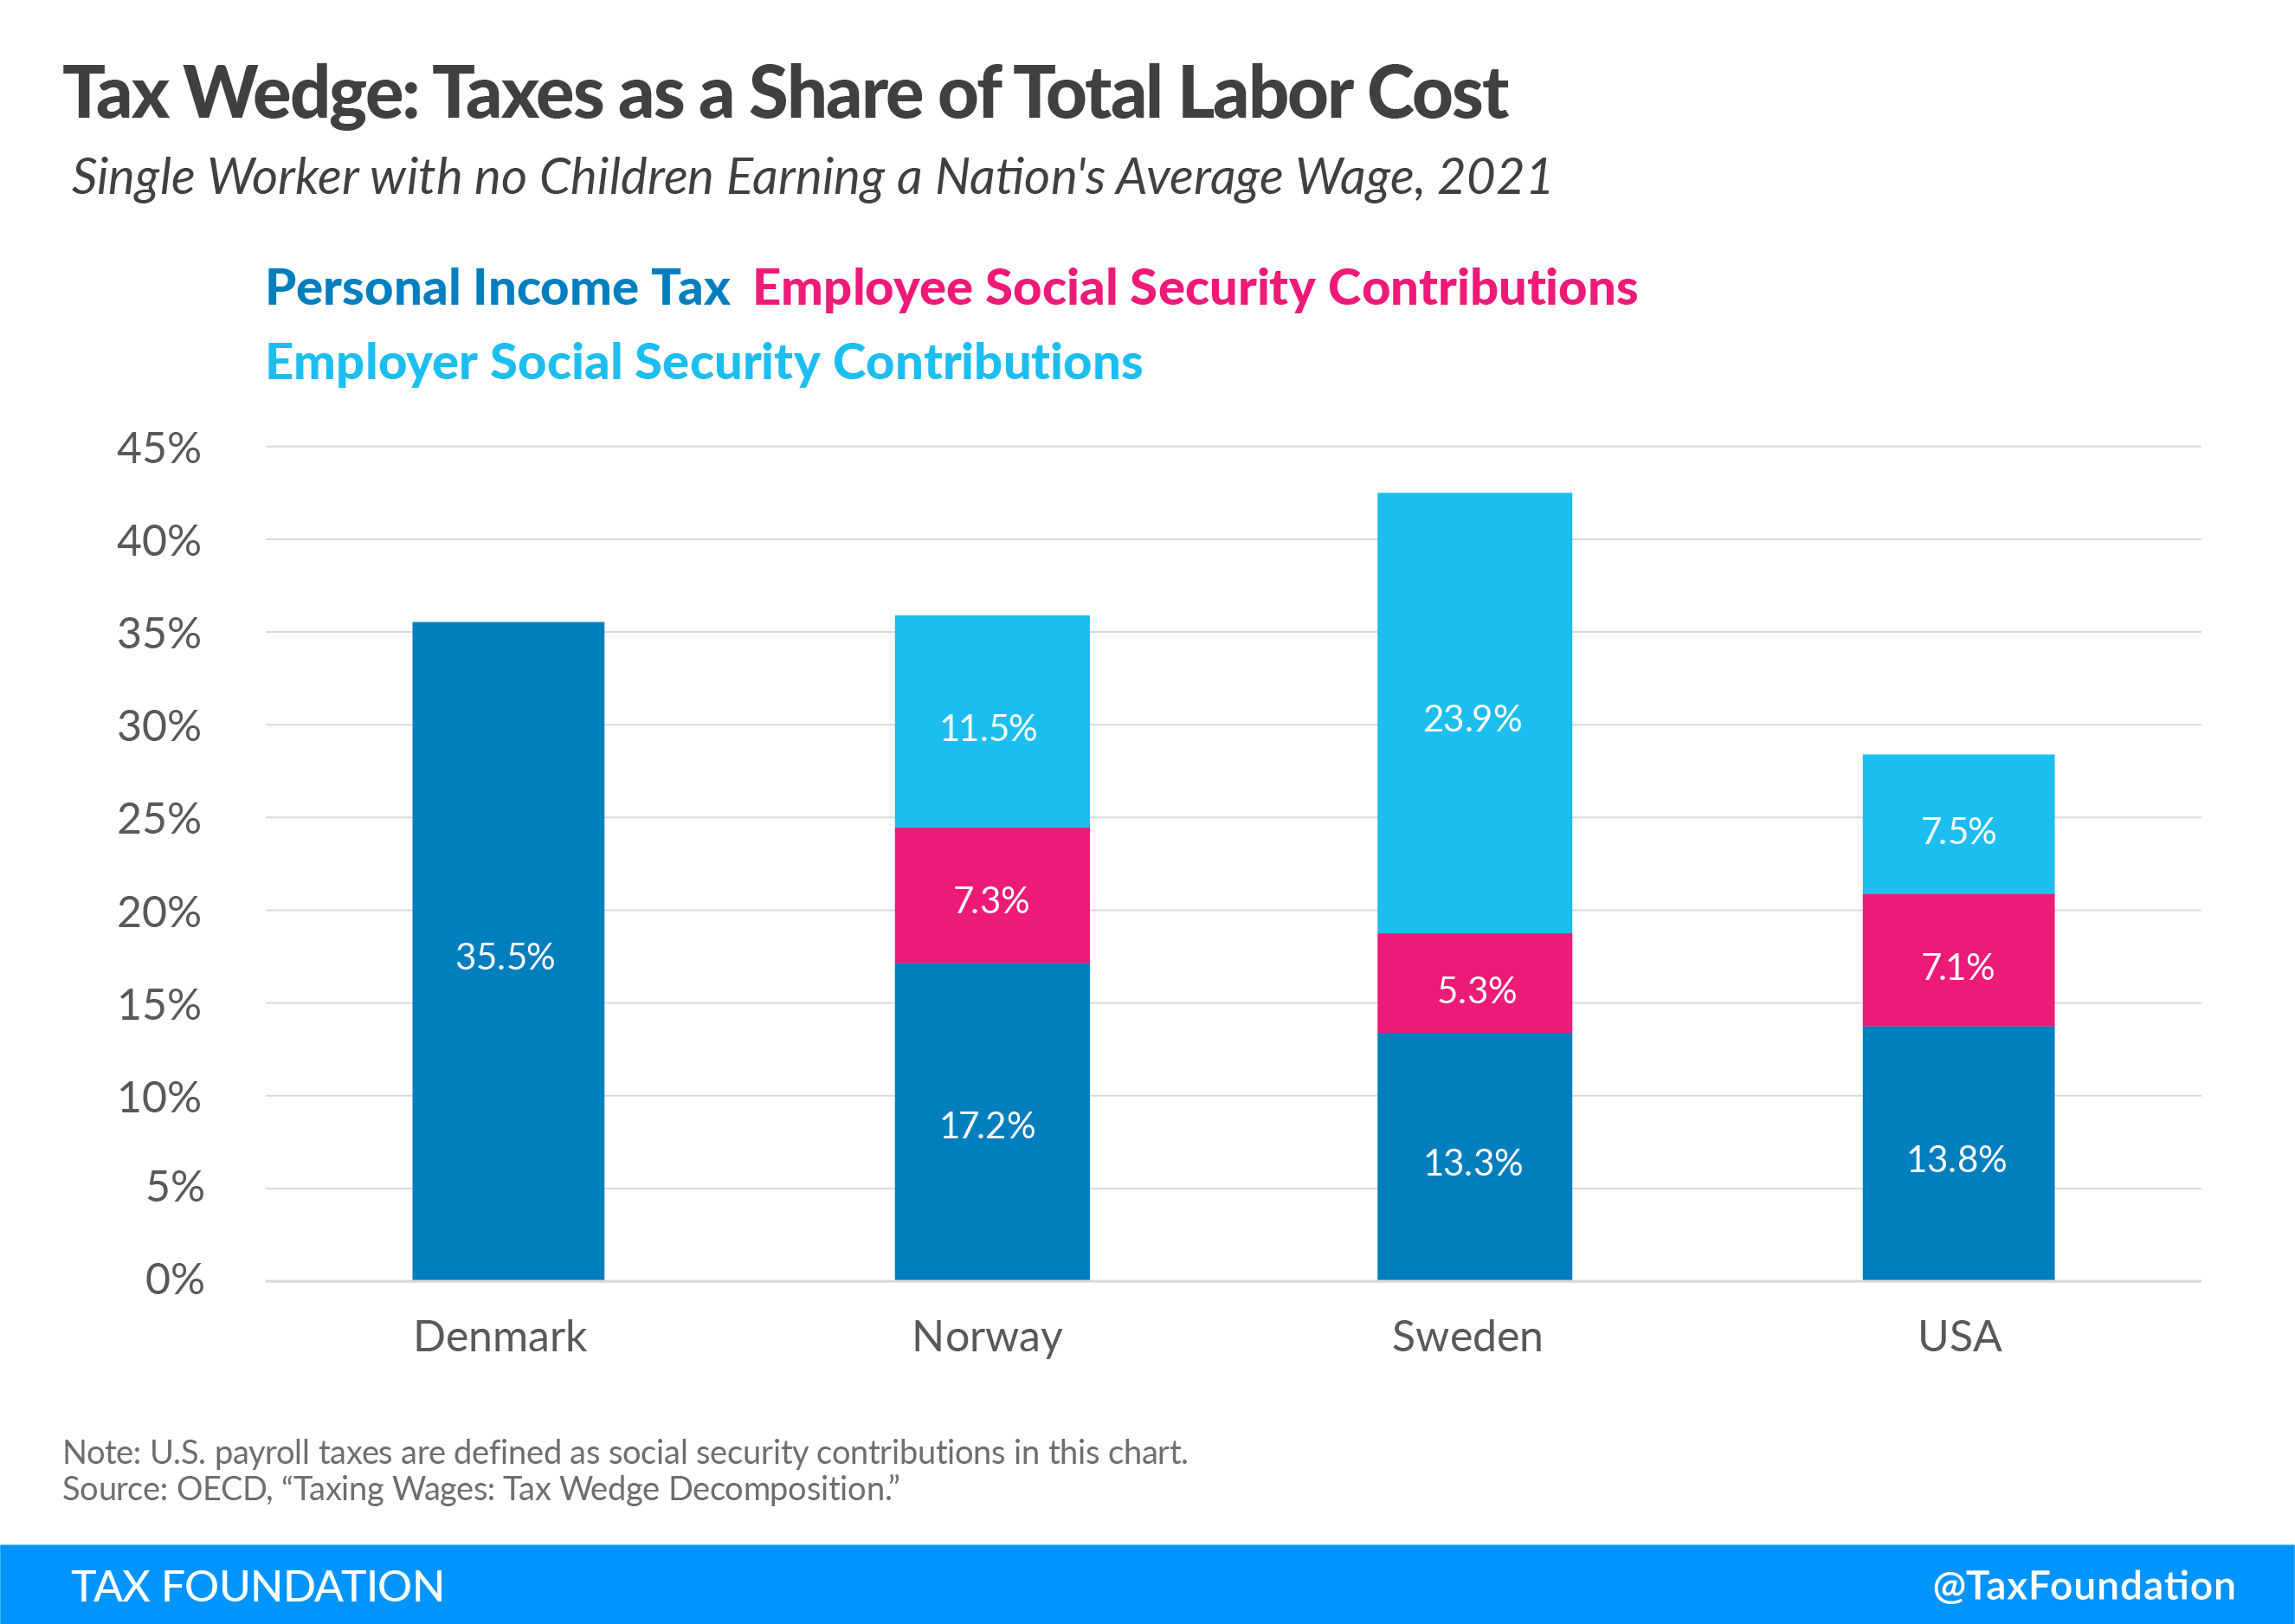 Scandinavian countries taxes to fund government spending and social programs rely on income taxes and social security contributions